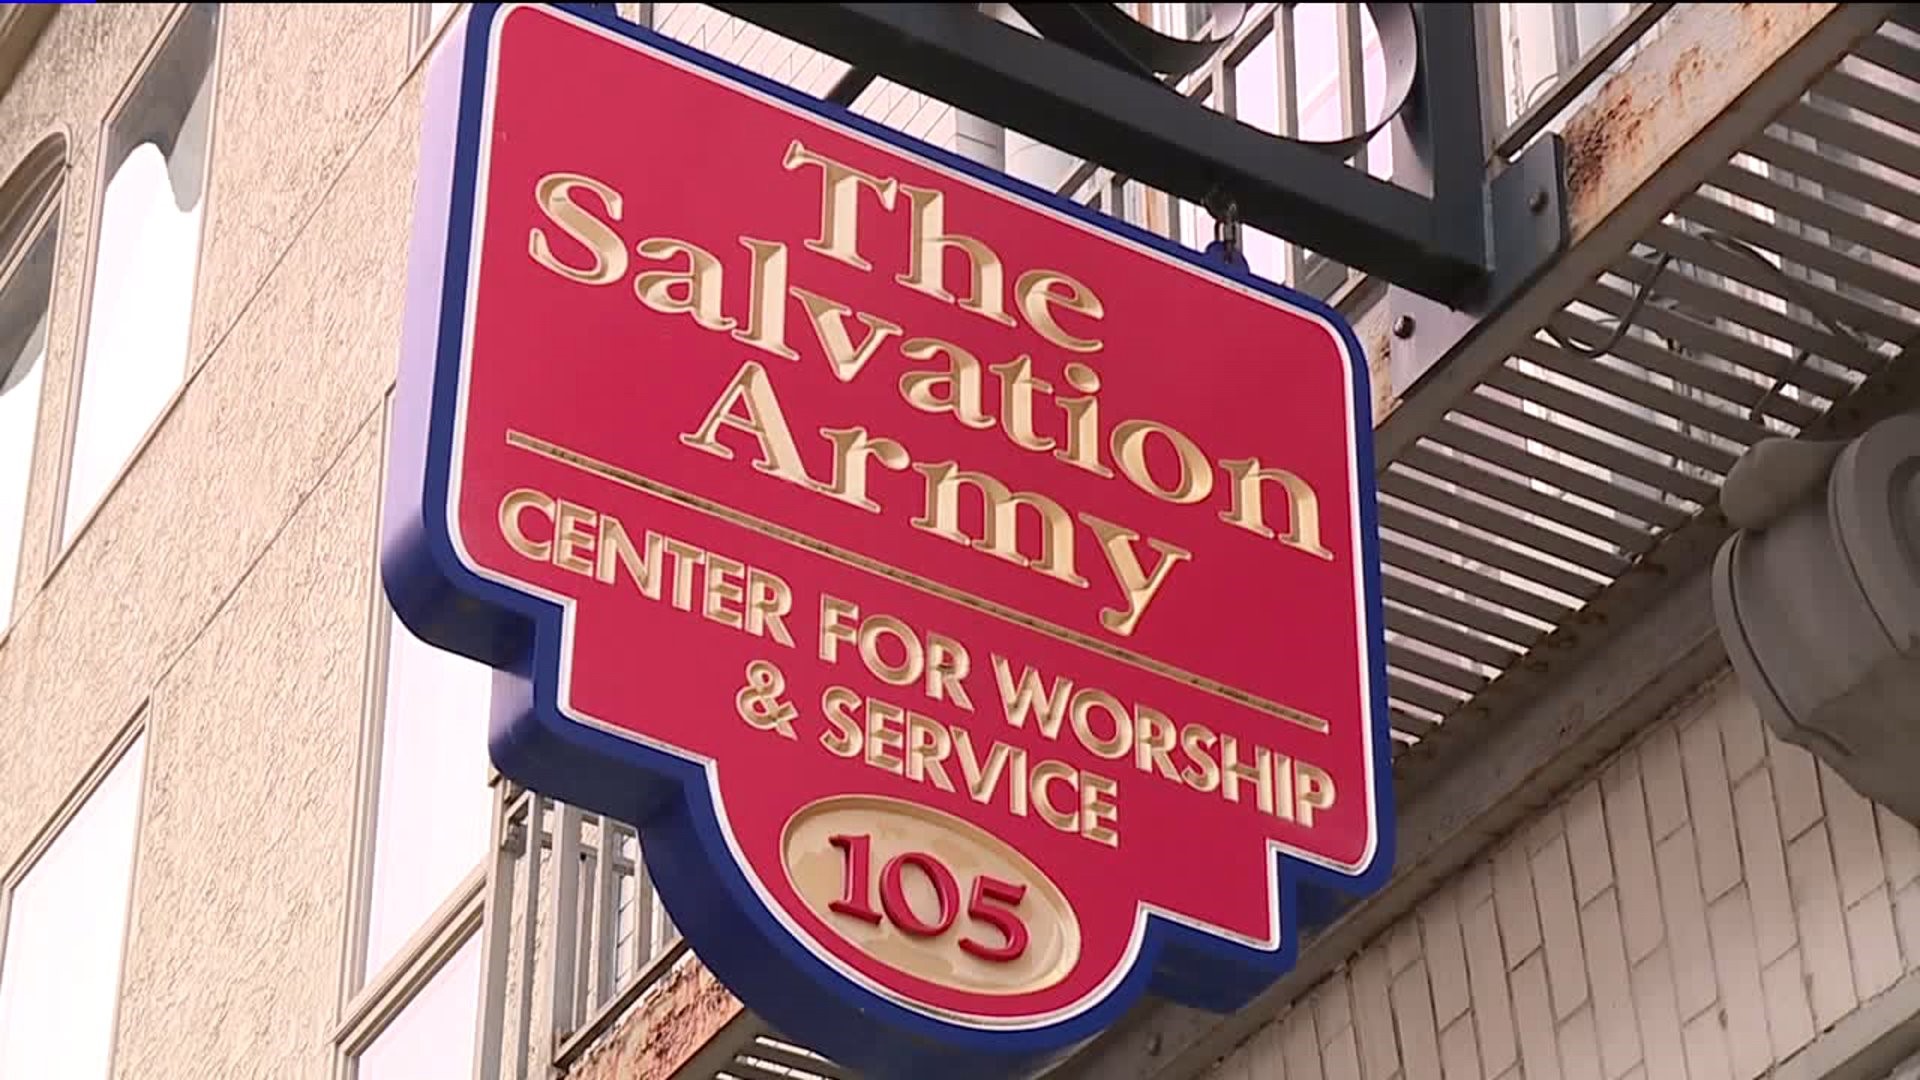 Salvation Army Officer Suspended After Audit Finds “Financial